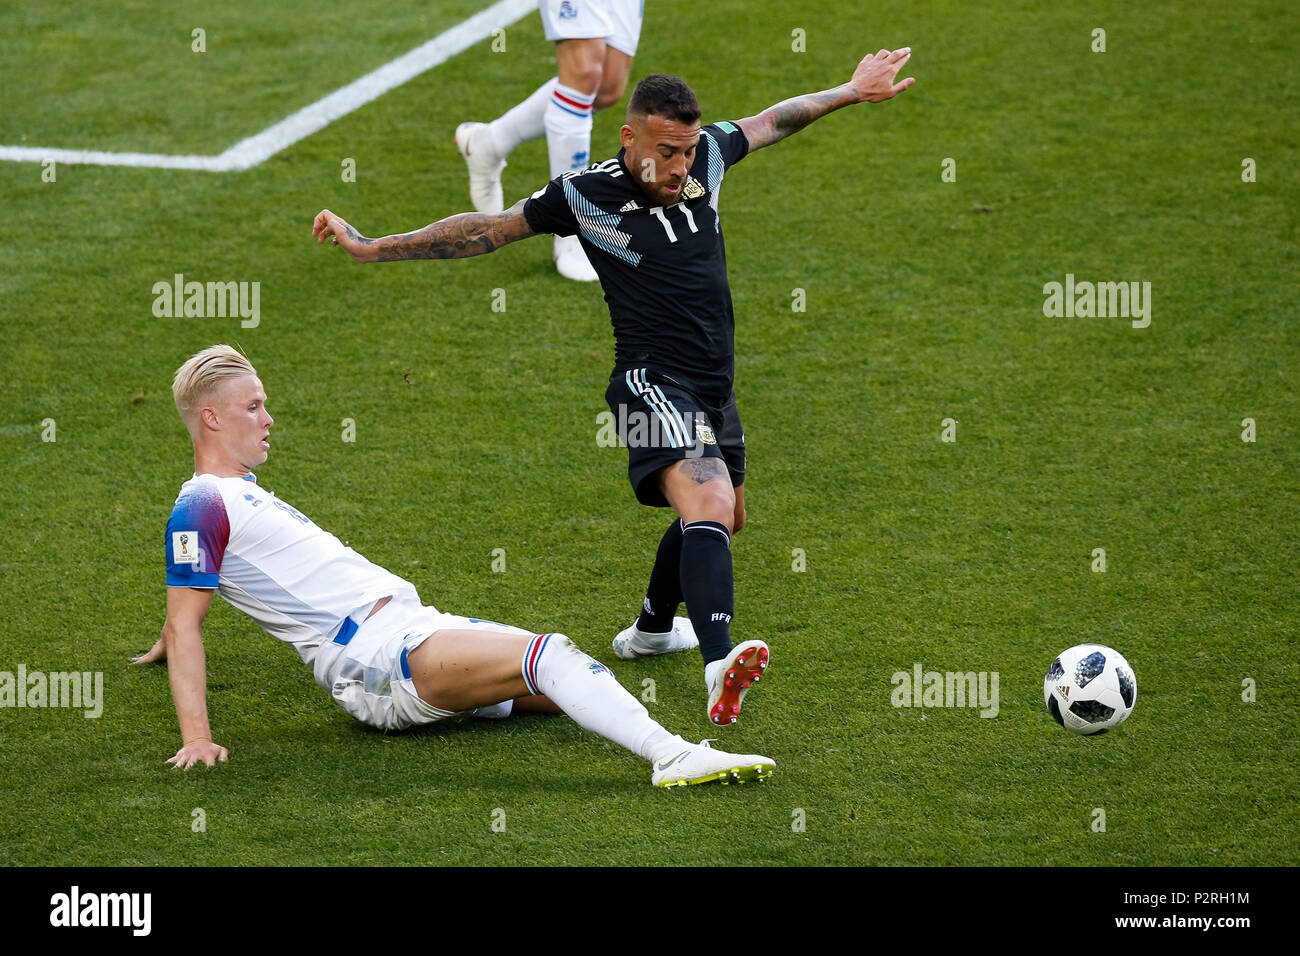 Moscow, Russia. 16th Jun, 2018. Nicolas Otamendi of Argentina and Hordur Magnusson of Iceland during the 2018 FIFA World Cup Group D match between Argentina and Iceland at Spartak Stadium on June 16th 2018 in Moscow, Russia. (Photo by Daniel Chesterton/phcimages.com) Credit: PHC Images/Alamy Live News Stock Photo